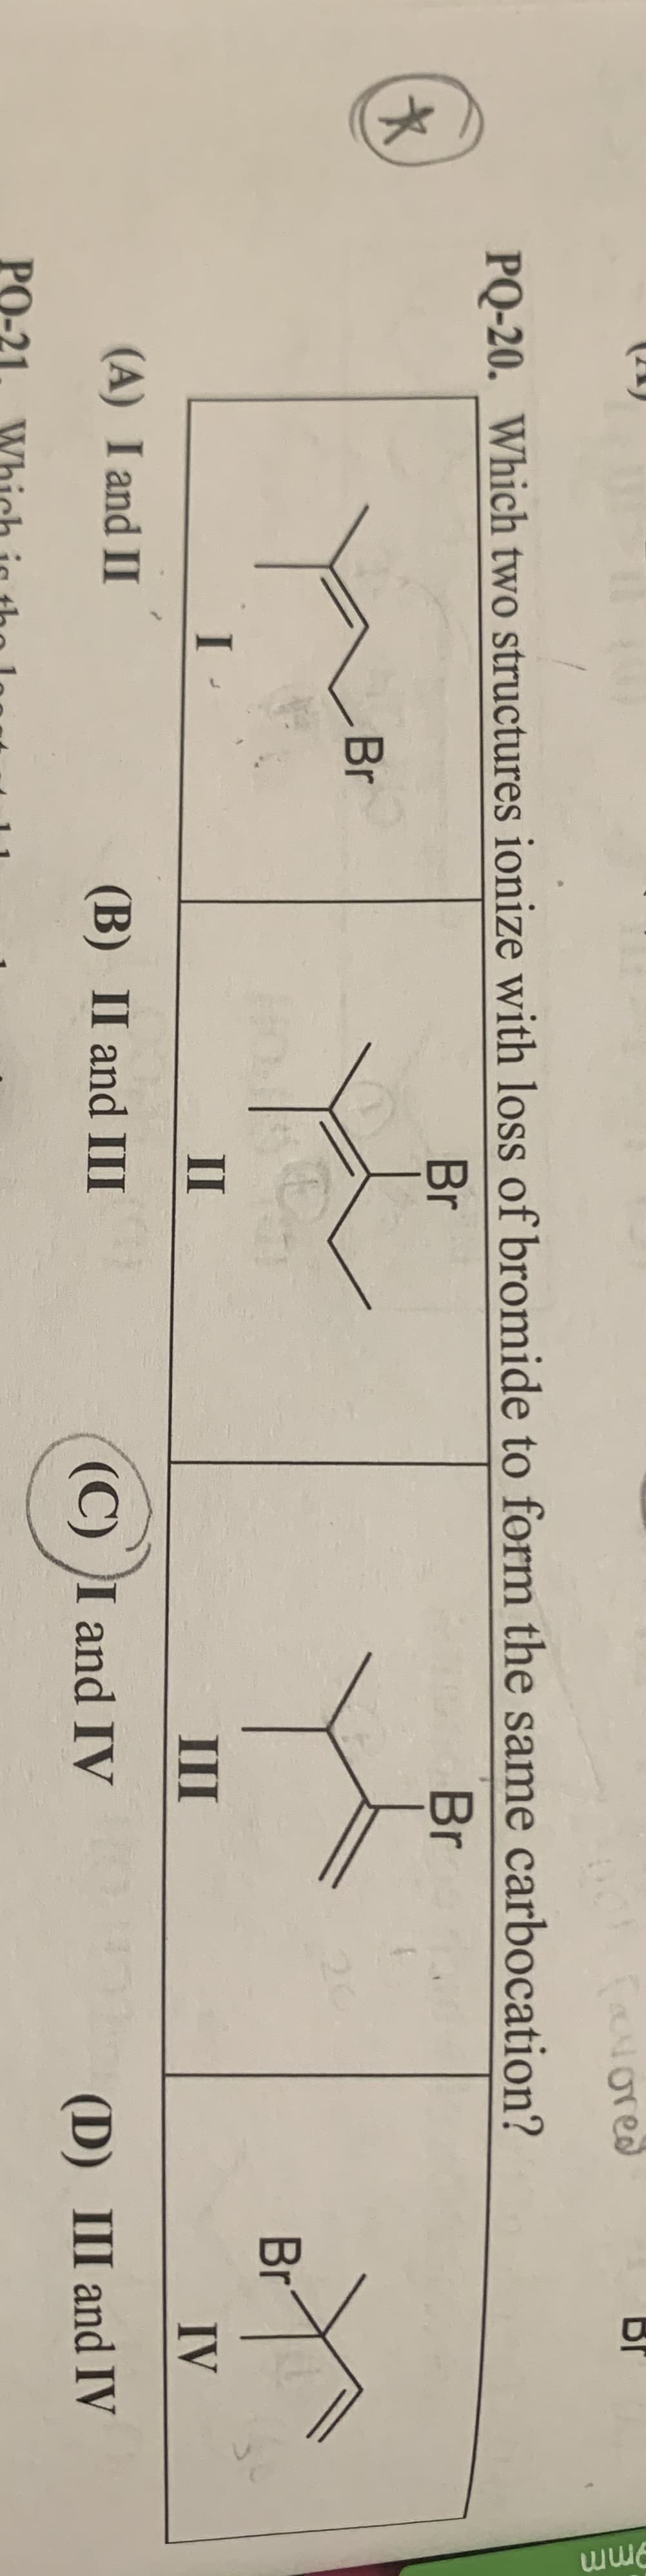 BI
aNored
PQ-20. Which two structures ionize with loss of bromide to form the same carbocation?
Br
Br
Br
Br
I -
II
III
IV
(A) I and II
(B) II and III
(C) I and IV
(D) III and IV
PO-21
